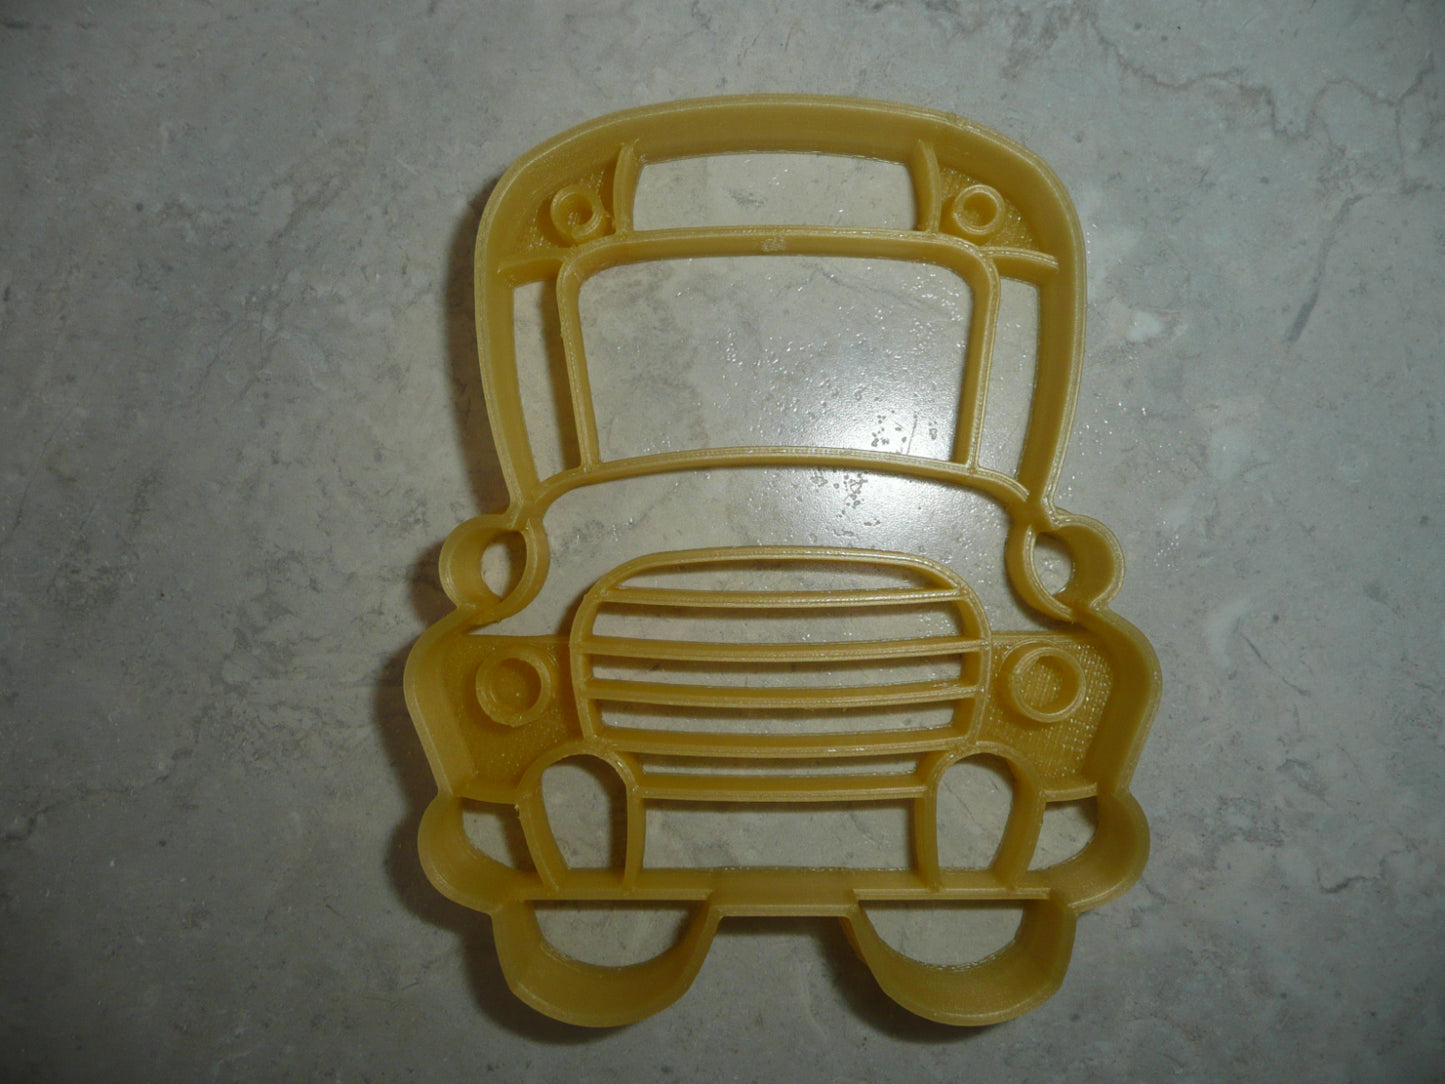 6x School Bus Front View Fondant Cutter Cupcake Topper 1.75 IN USA FD4959